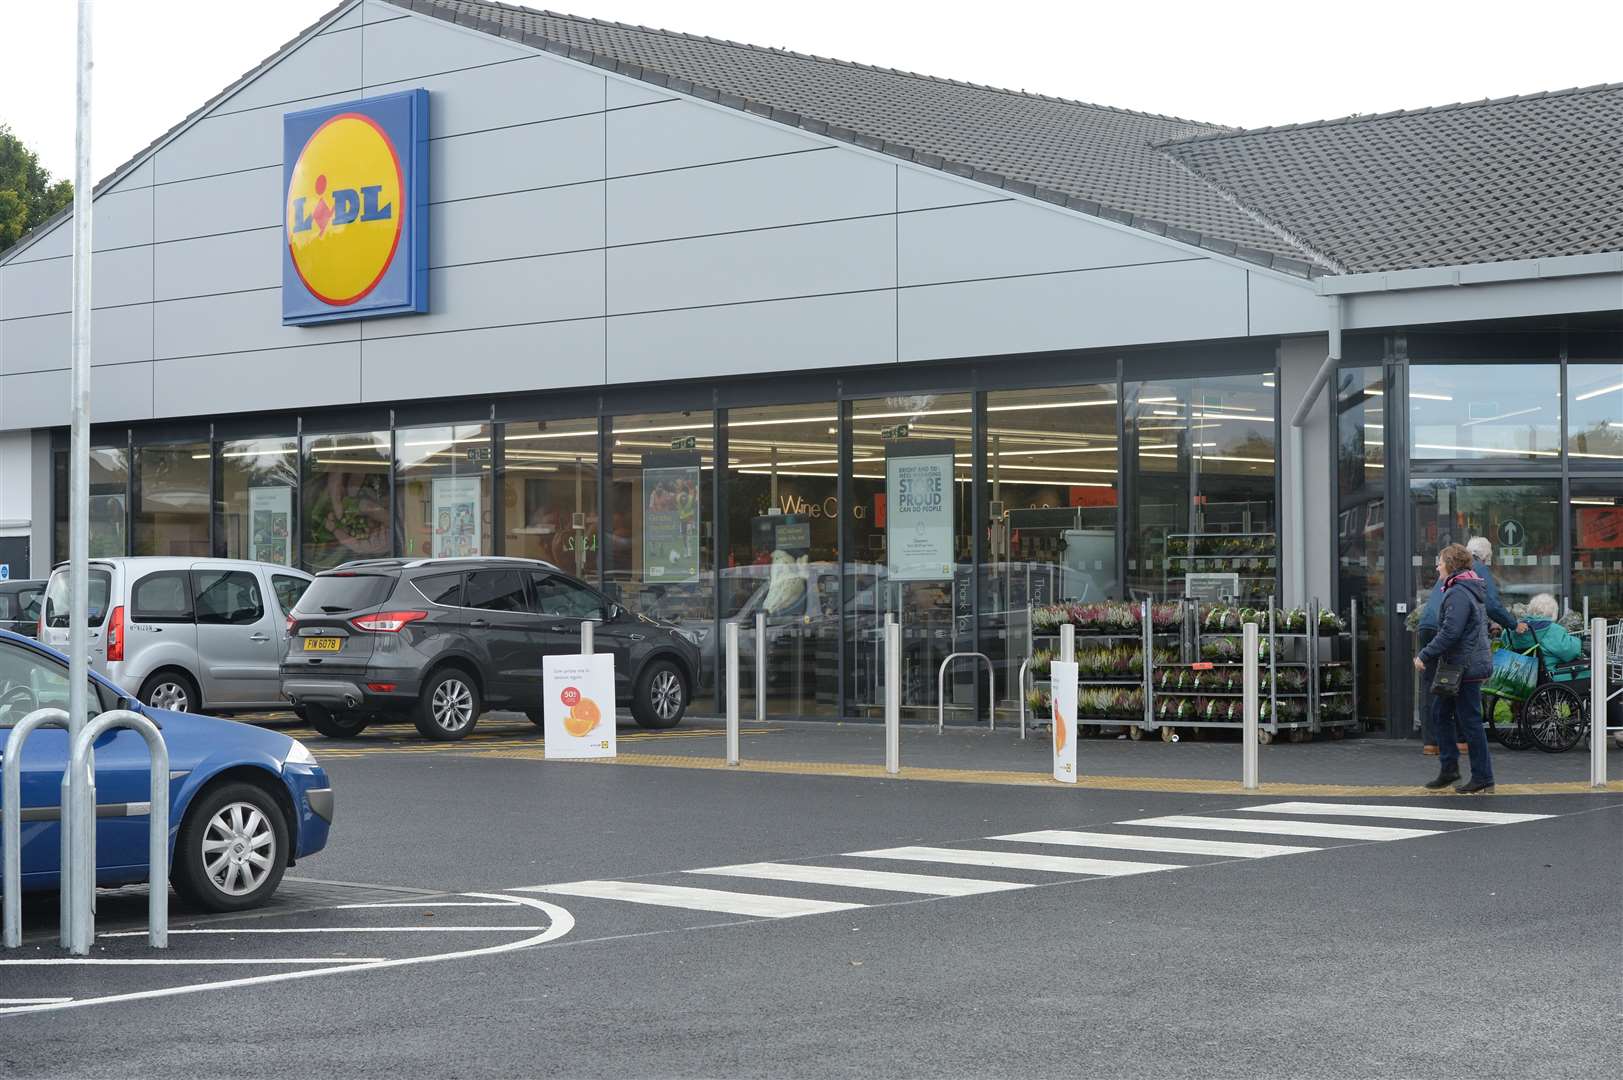 The Lidl in Telford Street, Inverness was broken into.